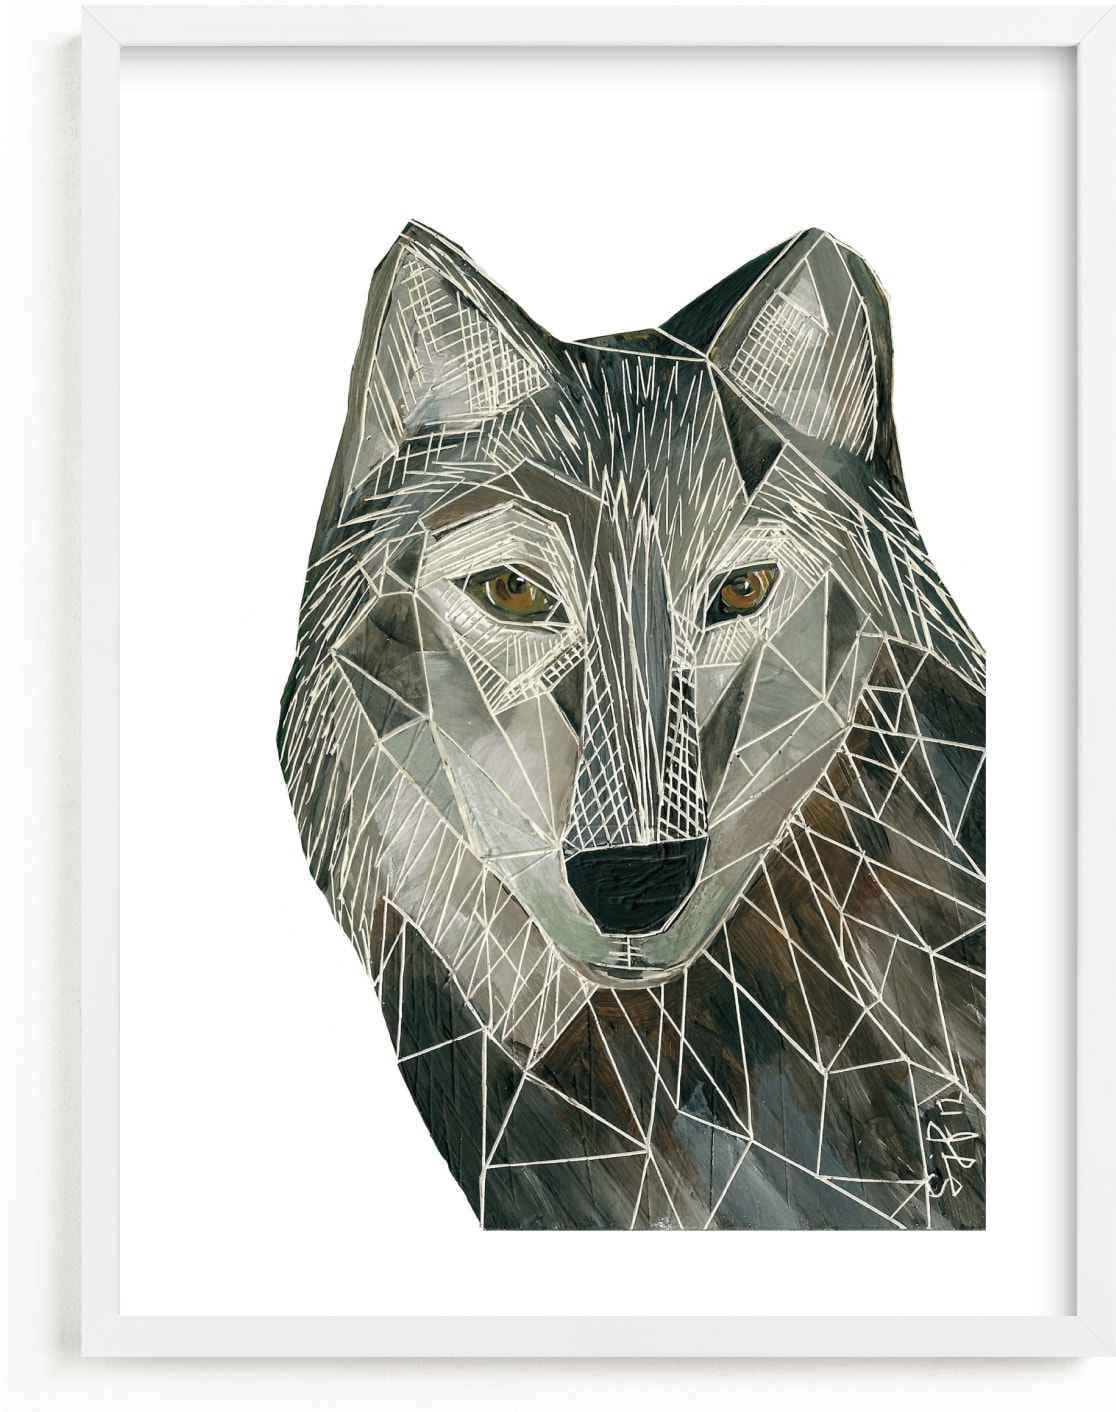 This is a grey art by Sarah Fitzgerald called Senor Wolf.